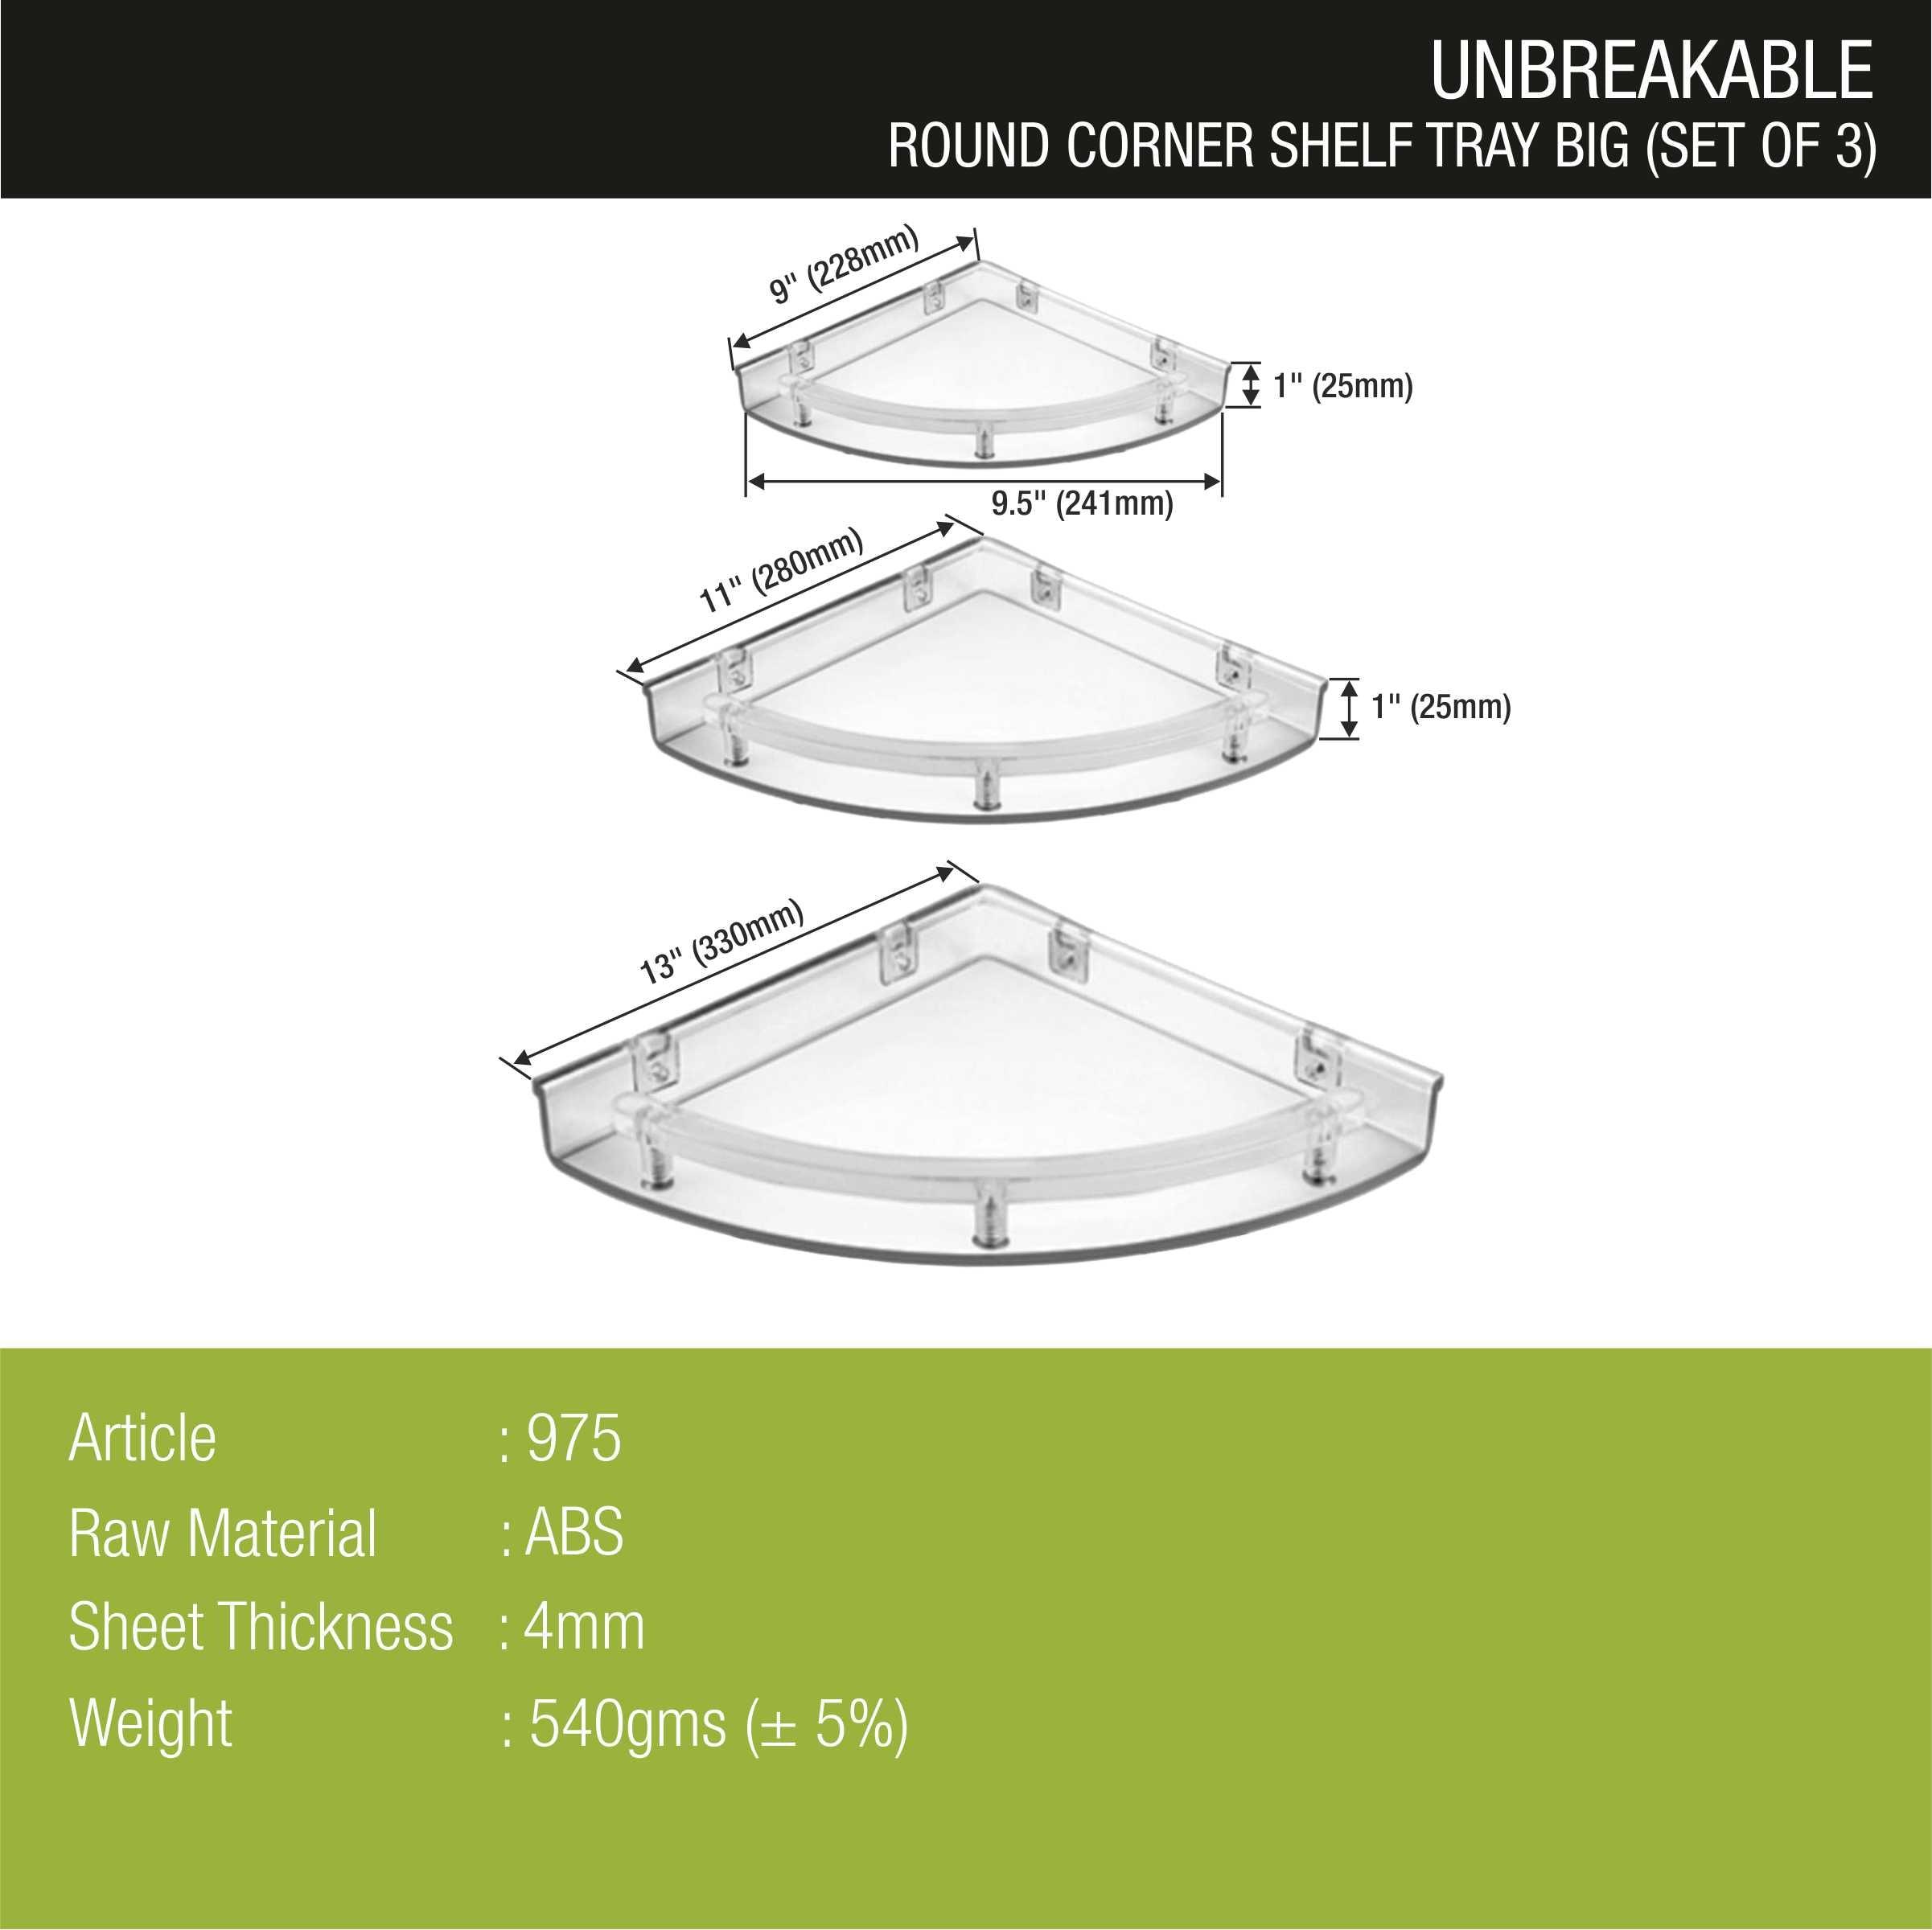 Round Large ABS Corner Shelf Tray (Set of 3) dimensions and sizes